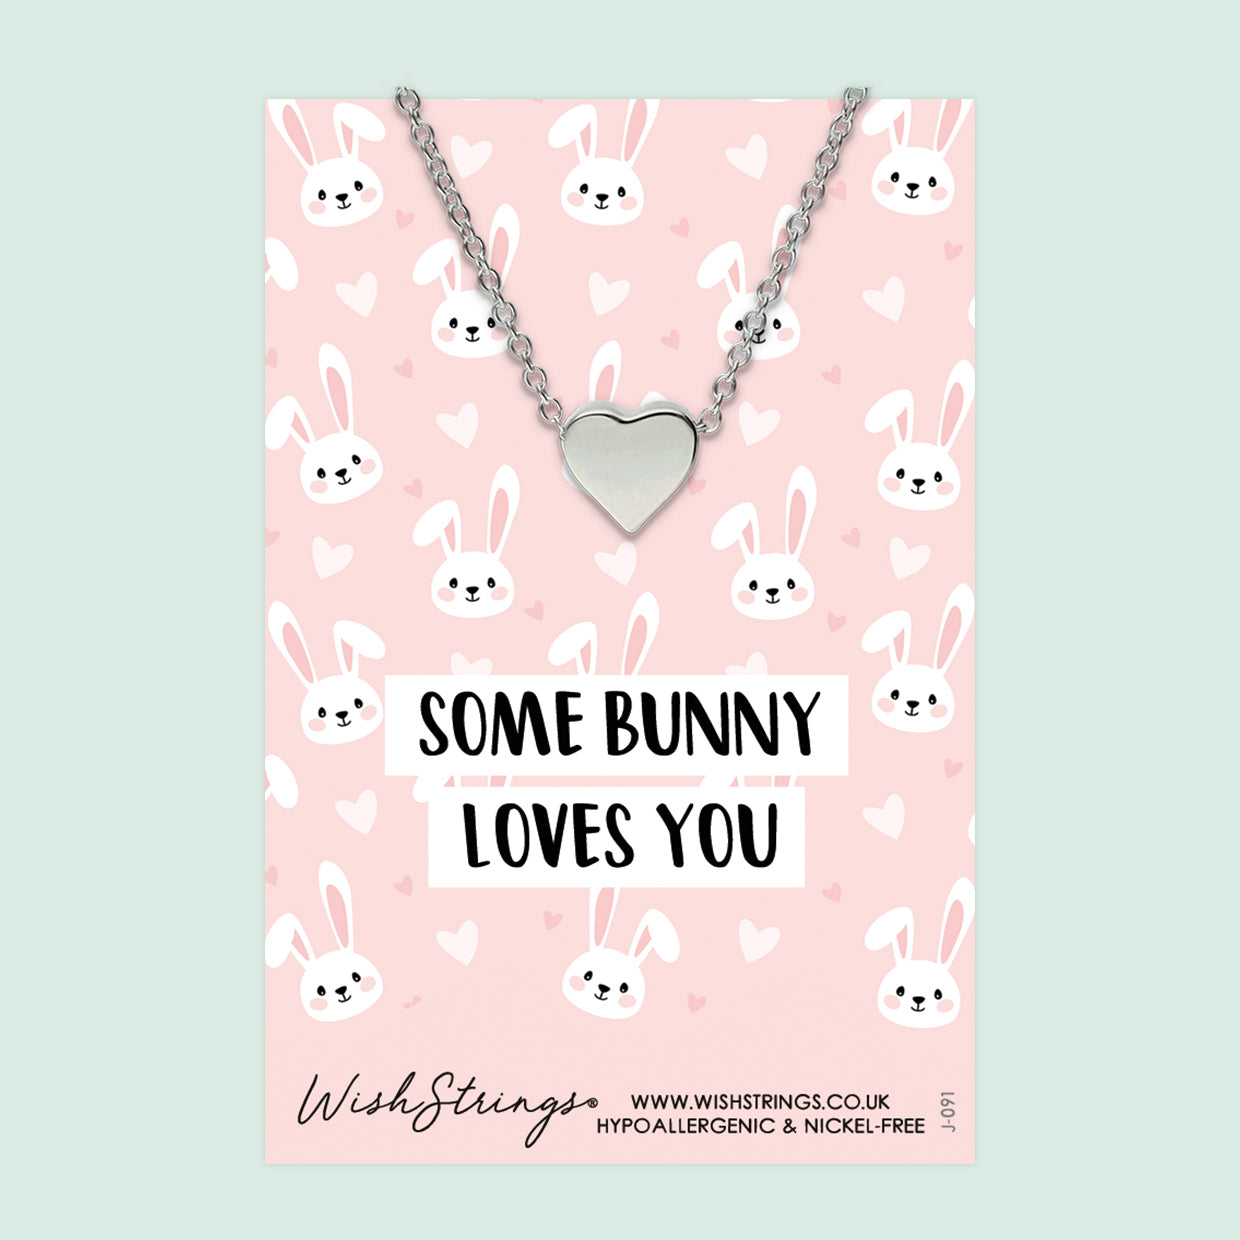 Some Bunny Loves You - Heart Necklace